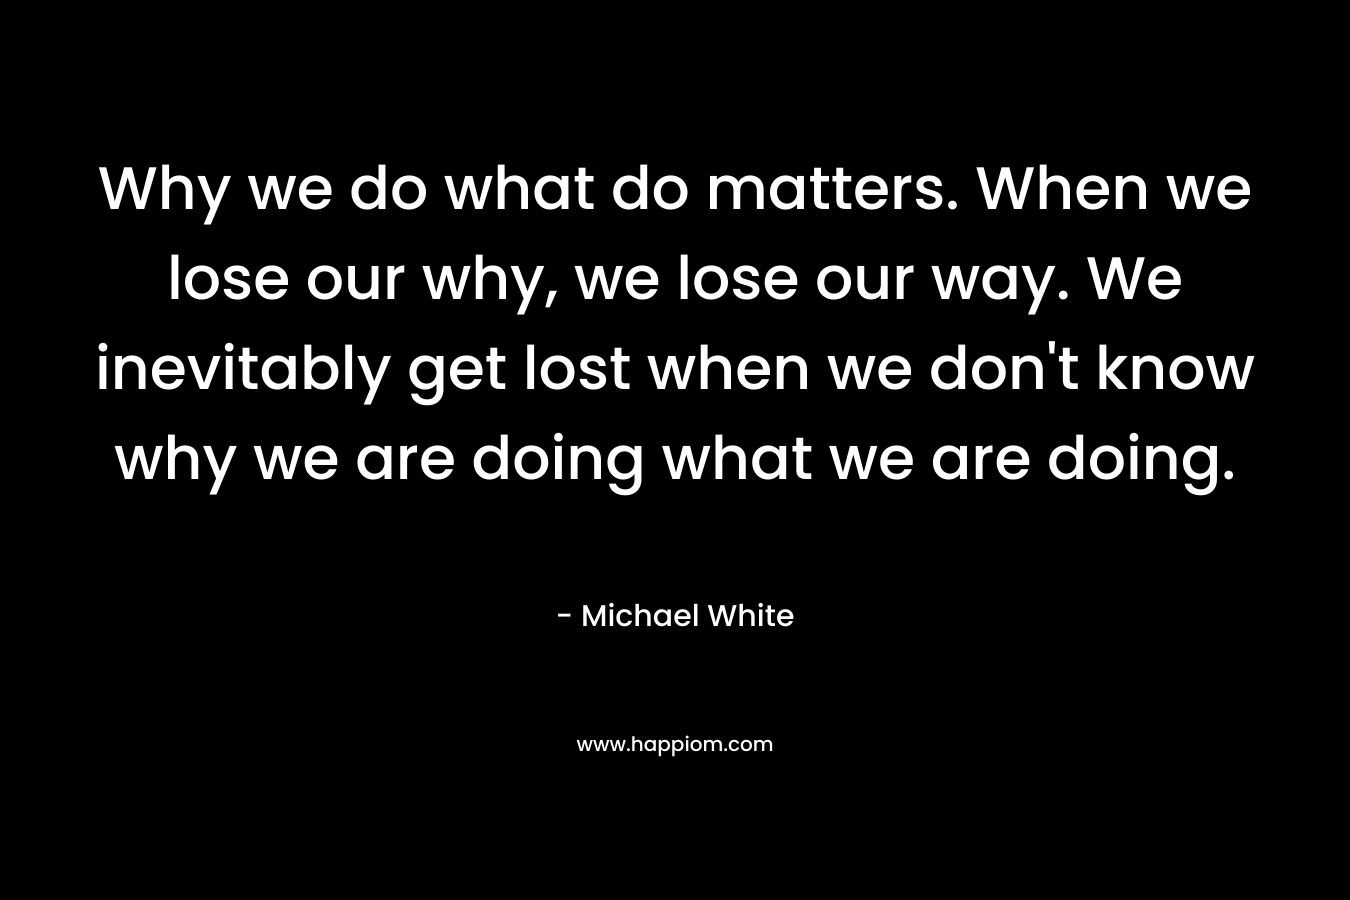 Why we do what do matters. When we lose our why, we lose our way. We inevitably get lost when we don't know why we are doing what we are doing.